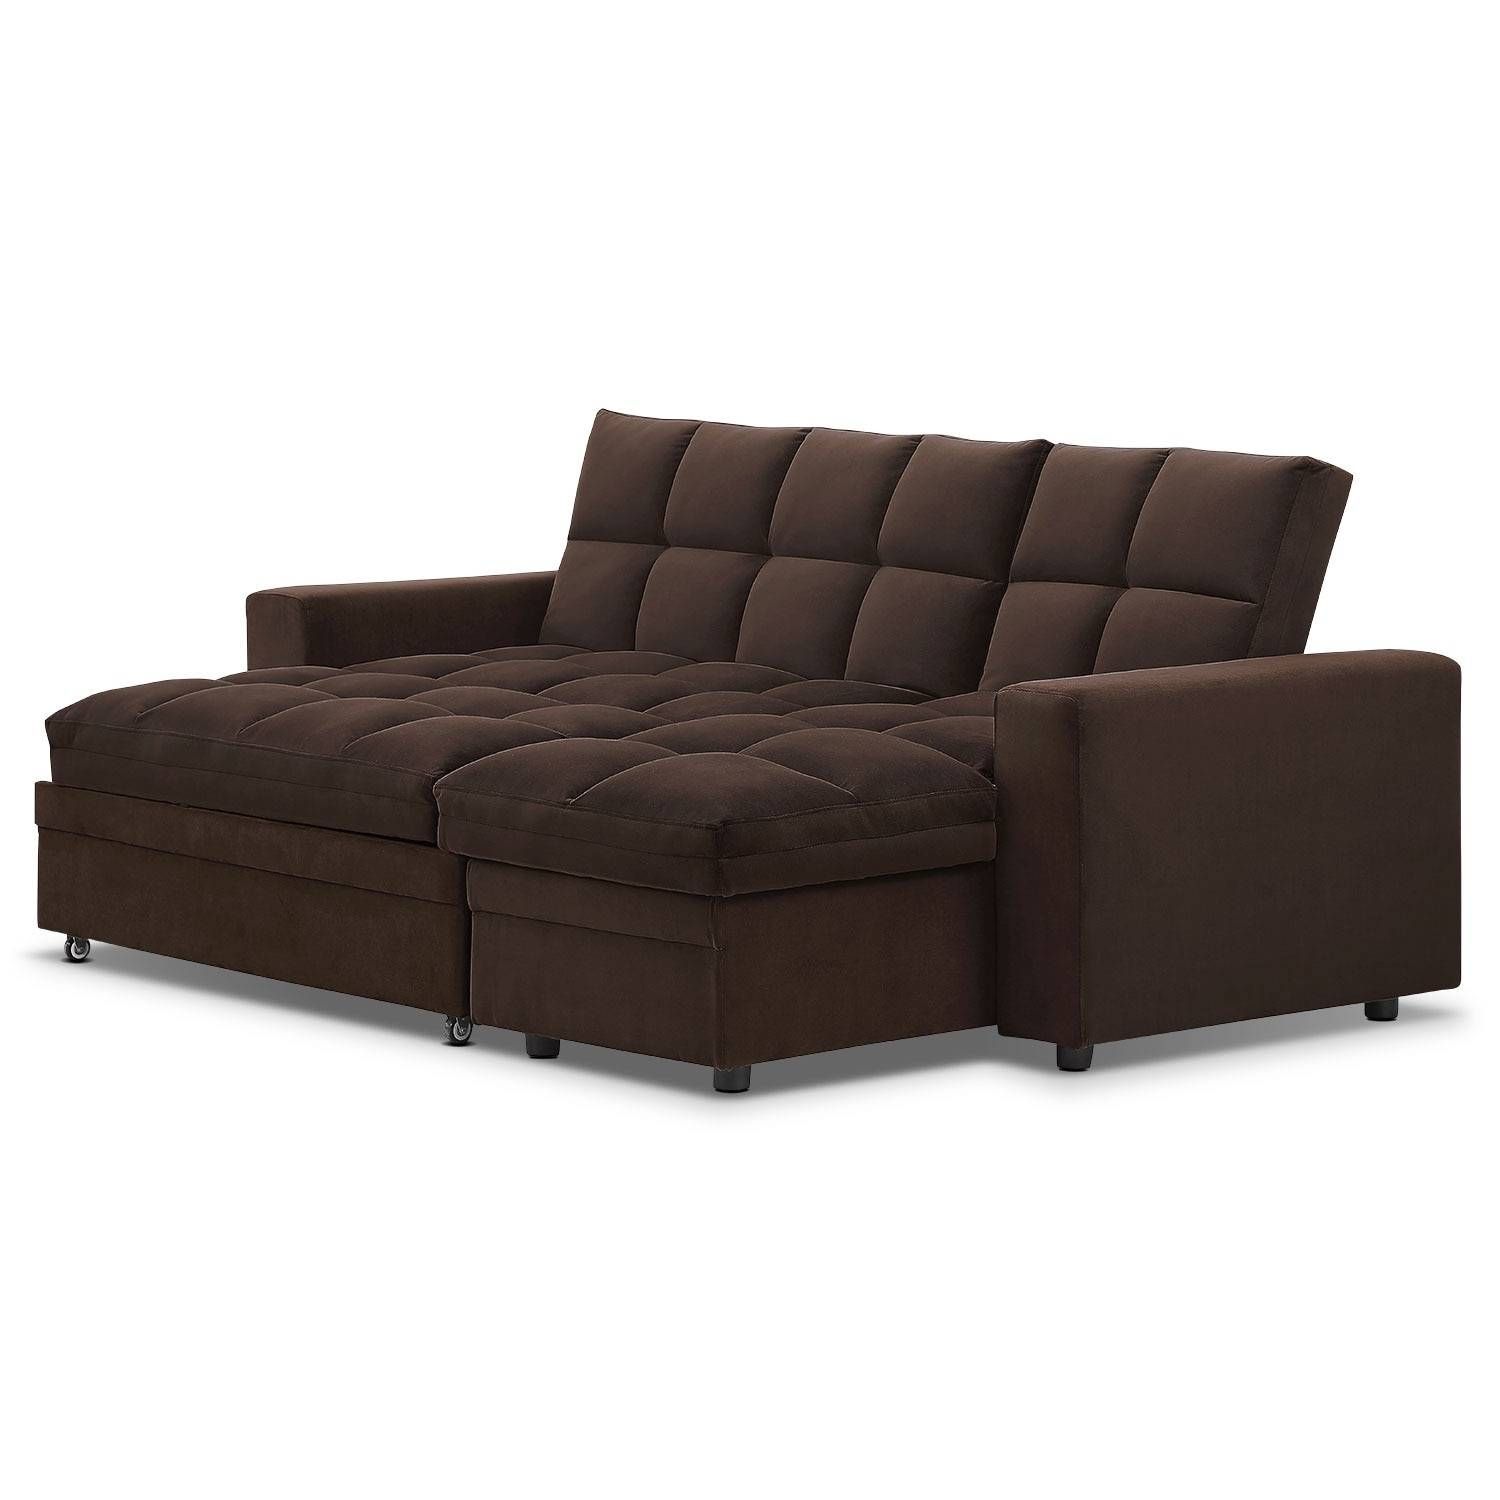 Metro Chaise Sofa Bed With Storage – Brown | American Signature Throughout Chaise Sofa Beds With Storage (View 6 of 15)